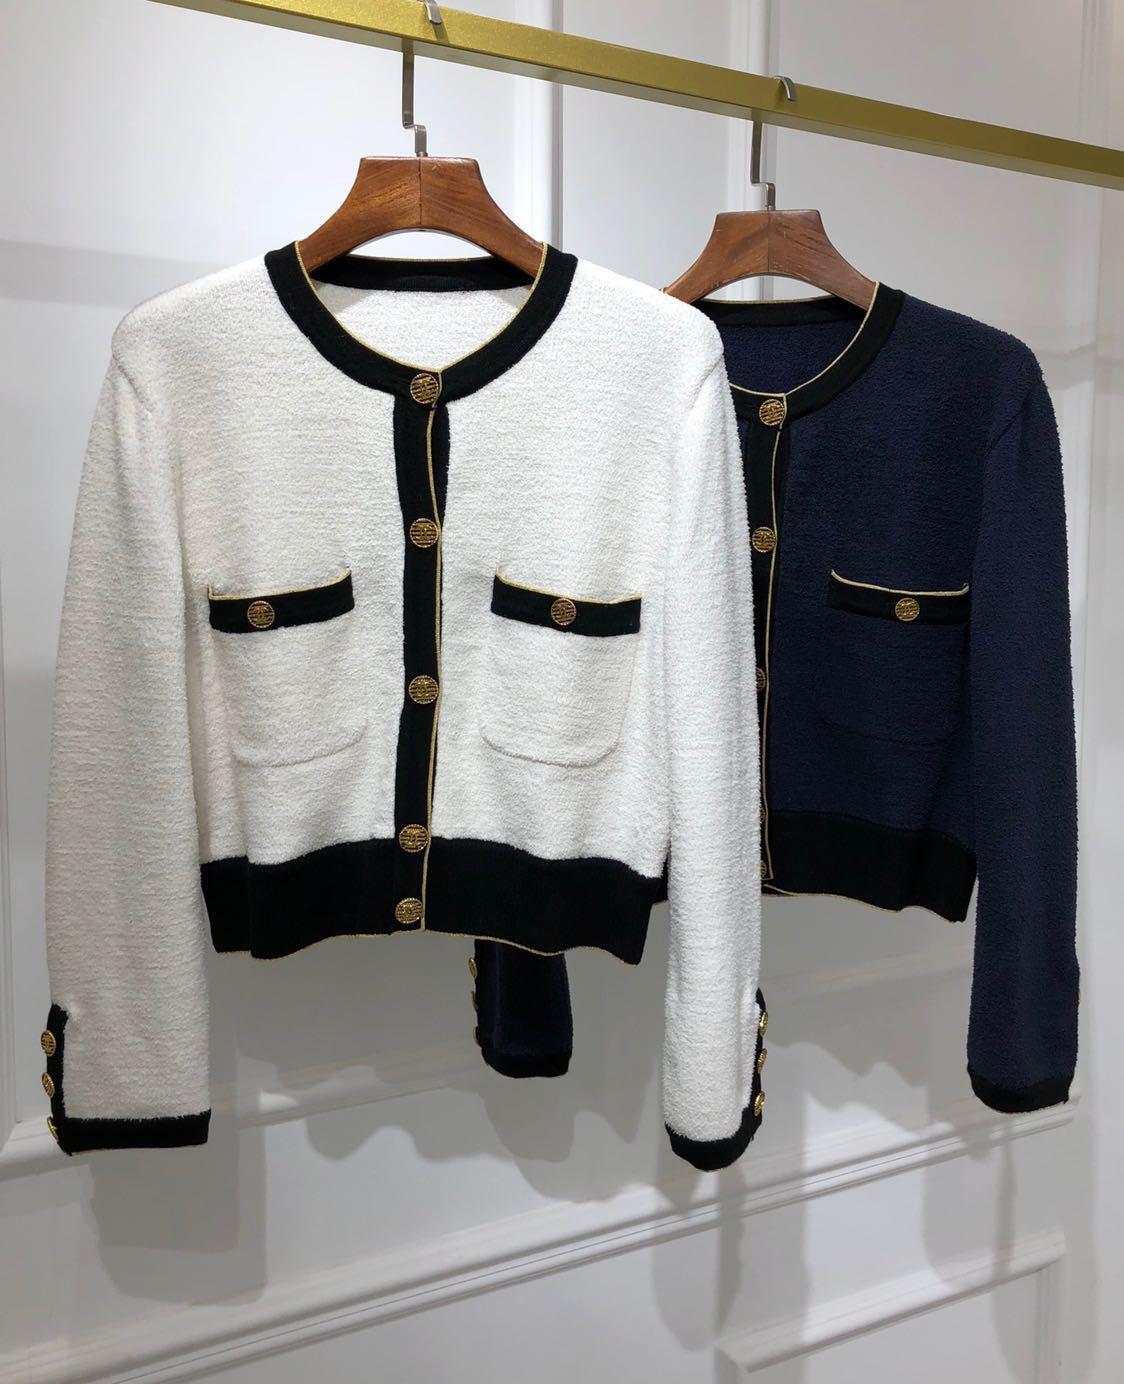 Authentic CHANEL Cardigans #241-003-224-8932